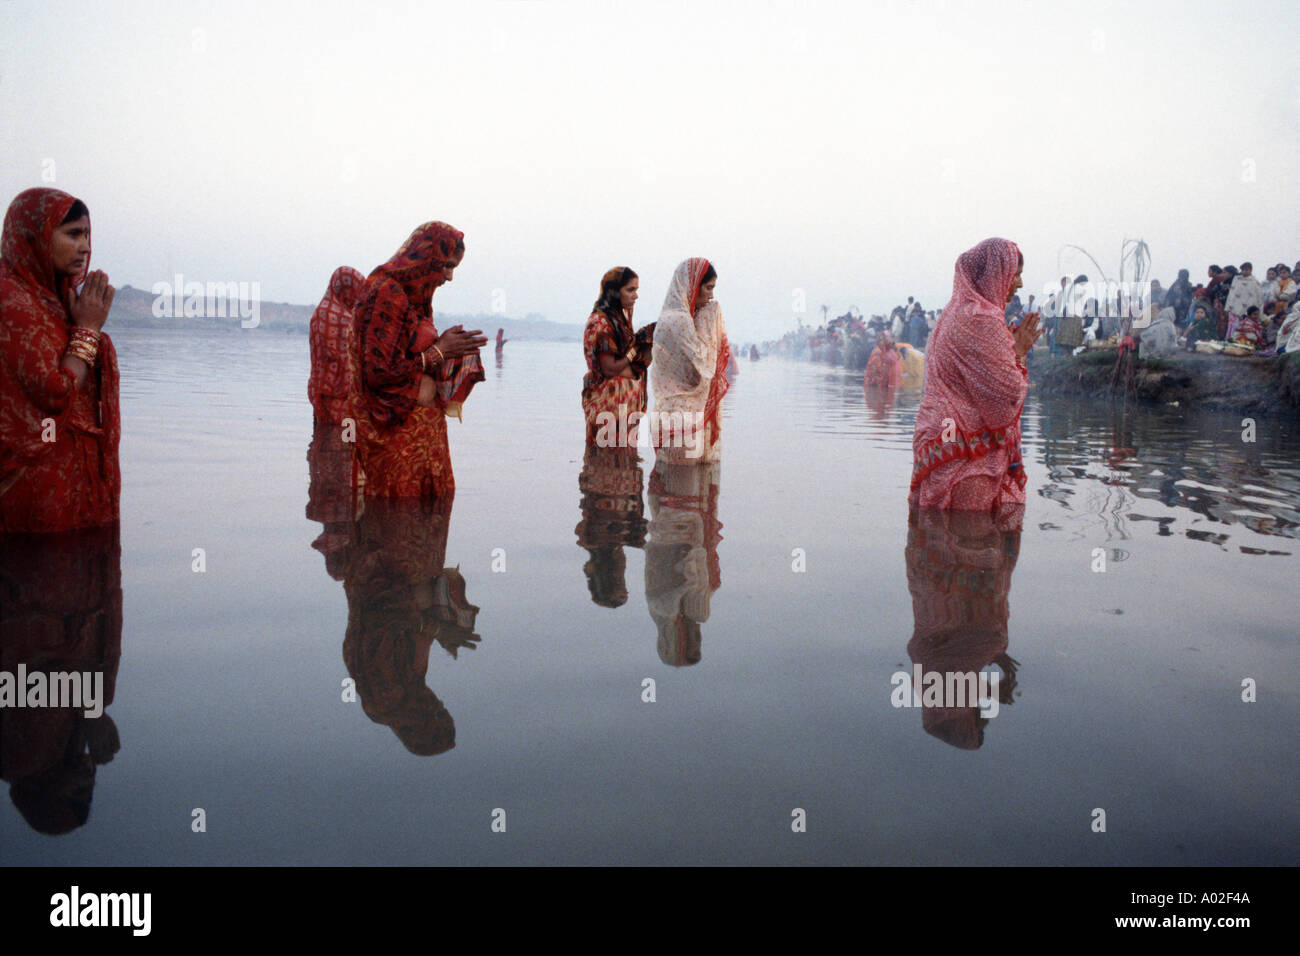 India Chhaat festival woman performing sunworship in the river Stock Photo